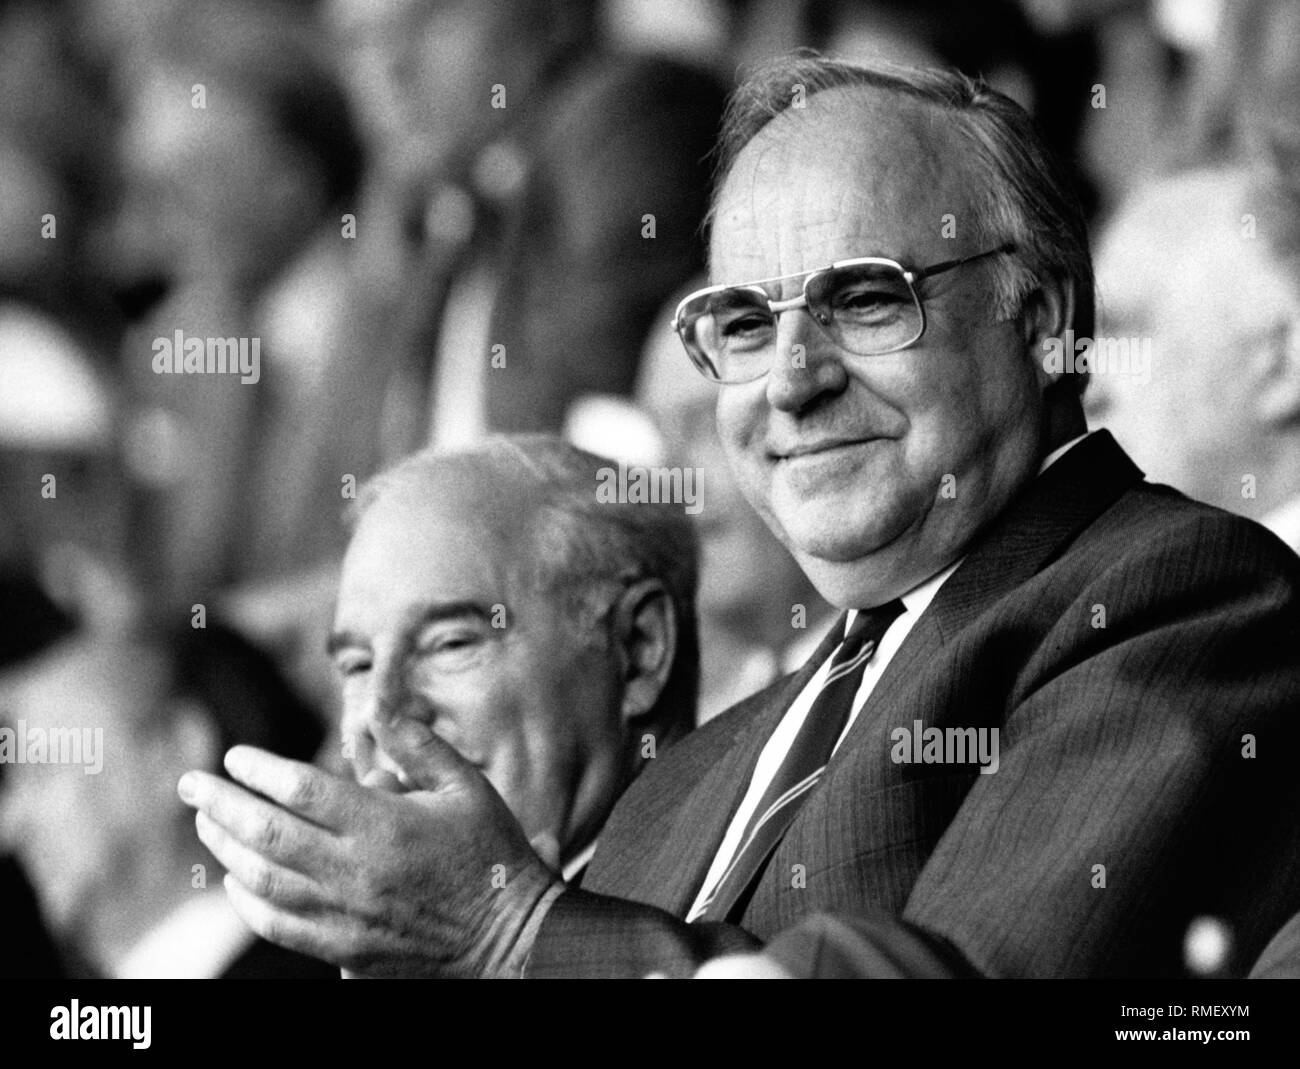 Chancellor Helmut Kohl at the opening match of the 1988 European Football Championship between Germany and Italy at the Duesseldorf Rheinstadion. Stock Photo